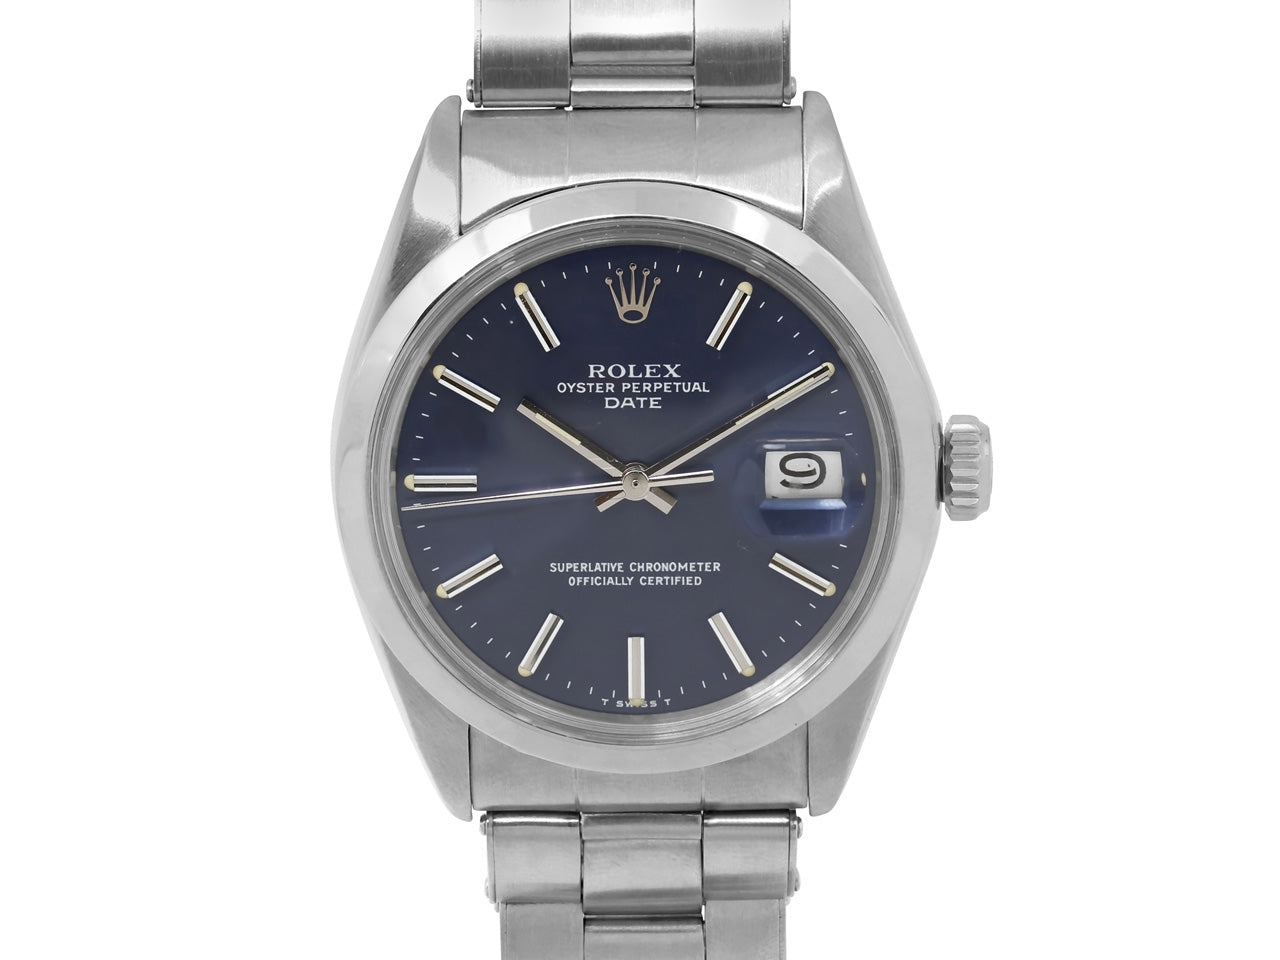 Rolex Oyster Perpetual Date Watch in Stainless Steel, 34 mm